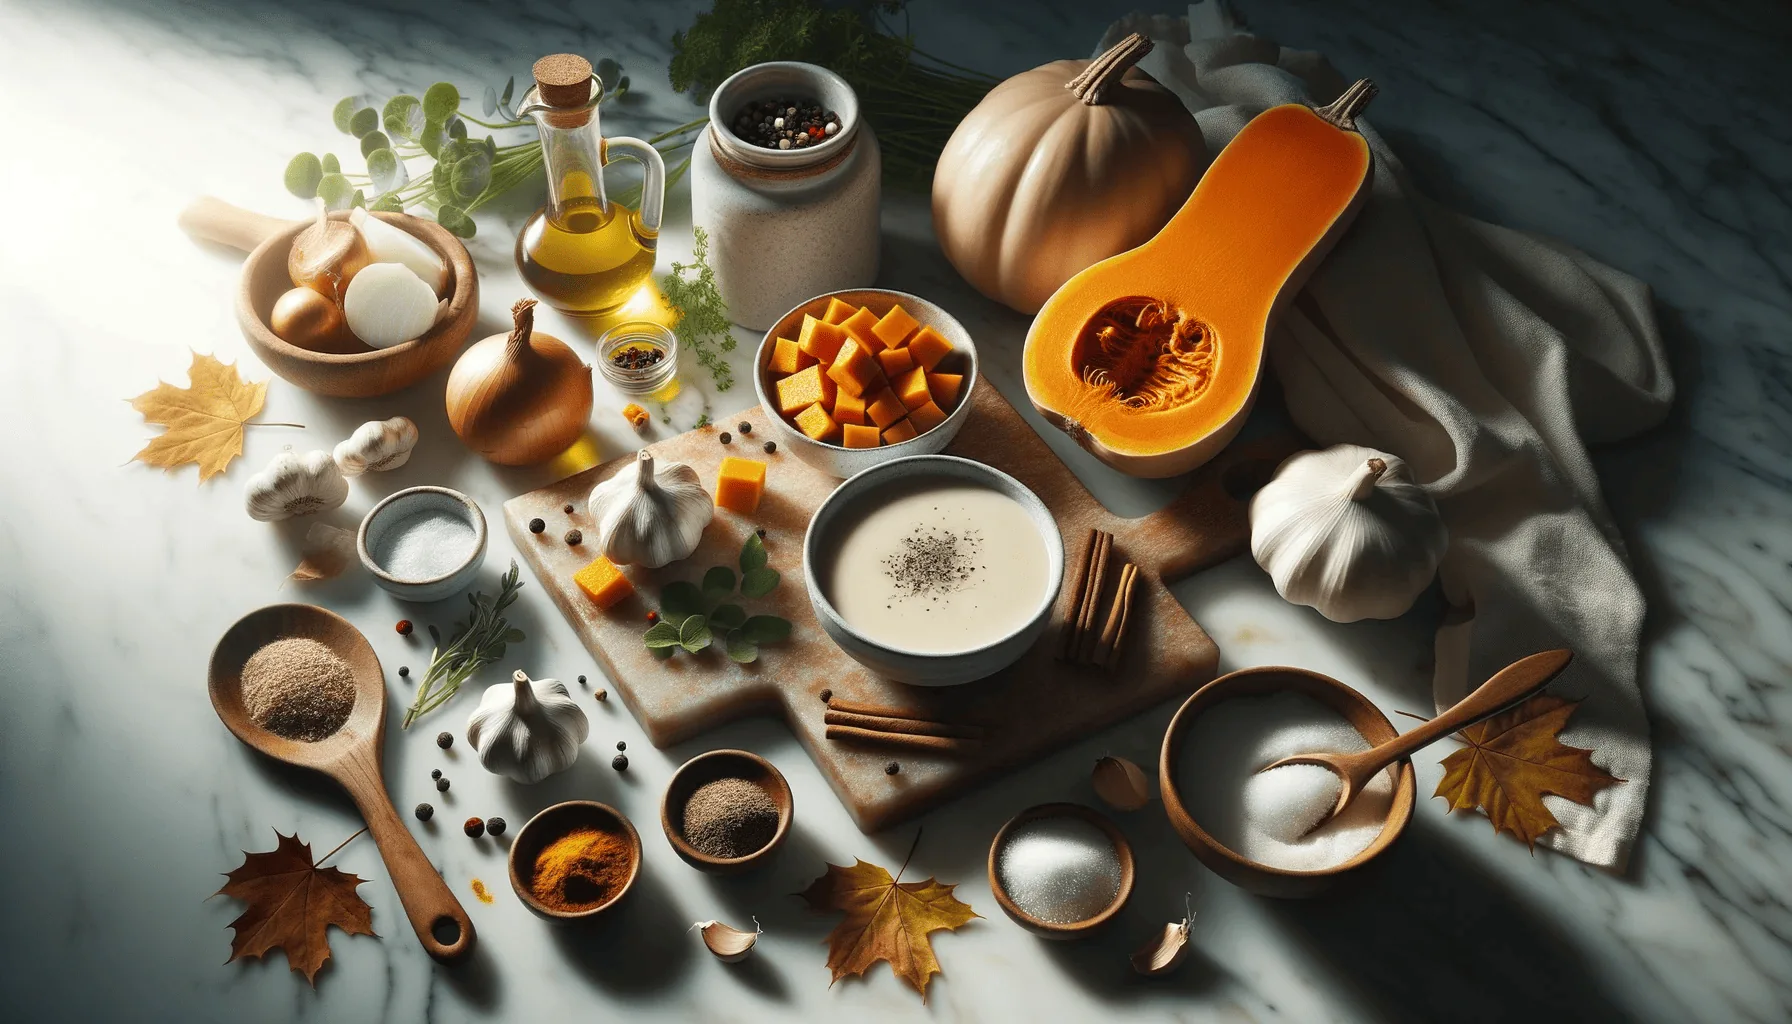 The ingredients for my roasted butternut squash soup recipe